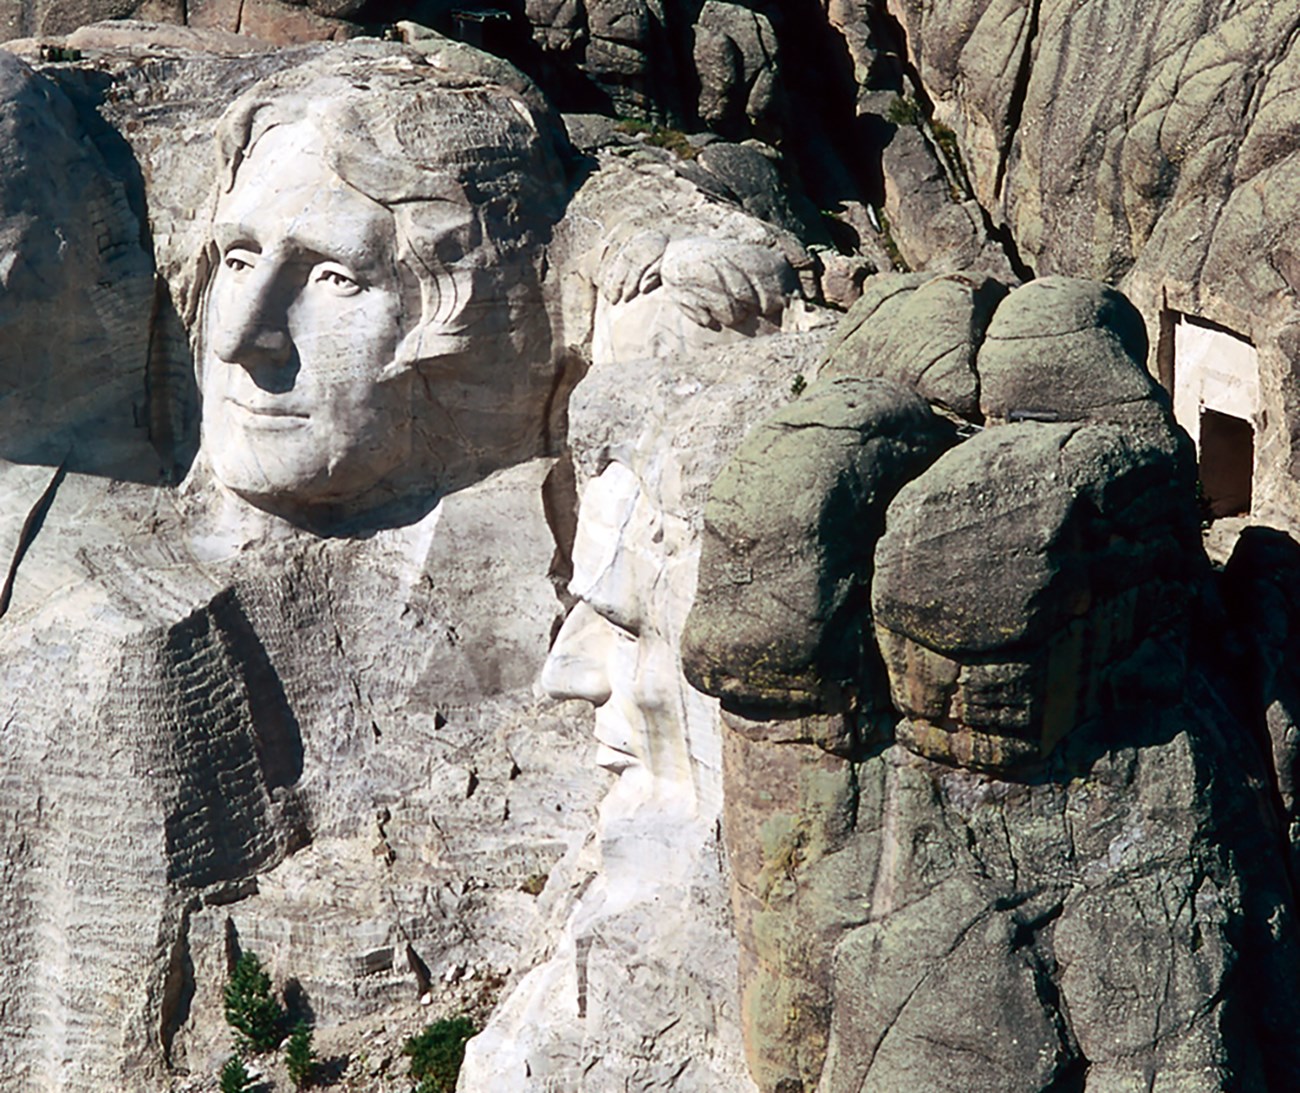 Photo of the location of the Hall of Records across a small valley behind the sculpted heads on Mount Rushmore.